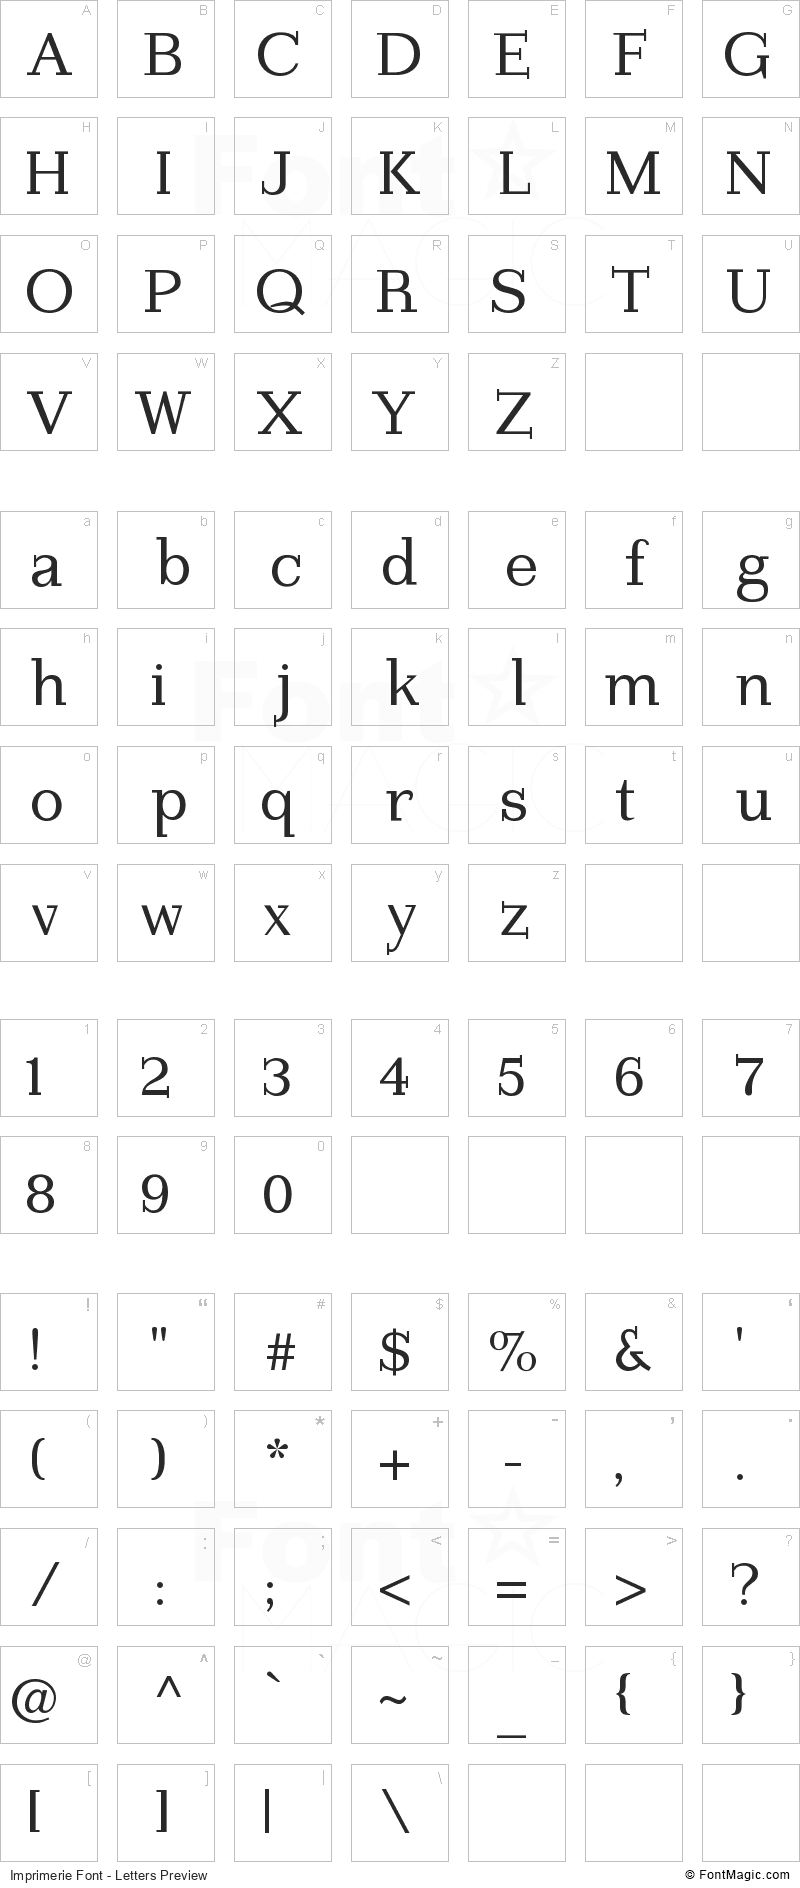 Imprimerie Font - All Latters Preview Chart